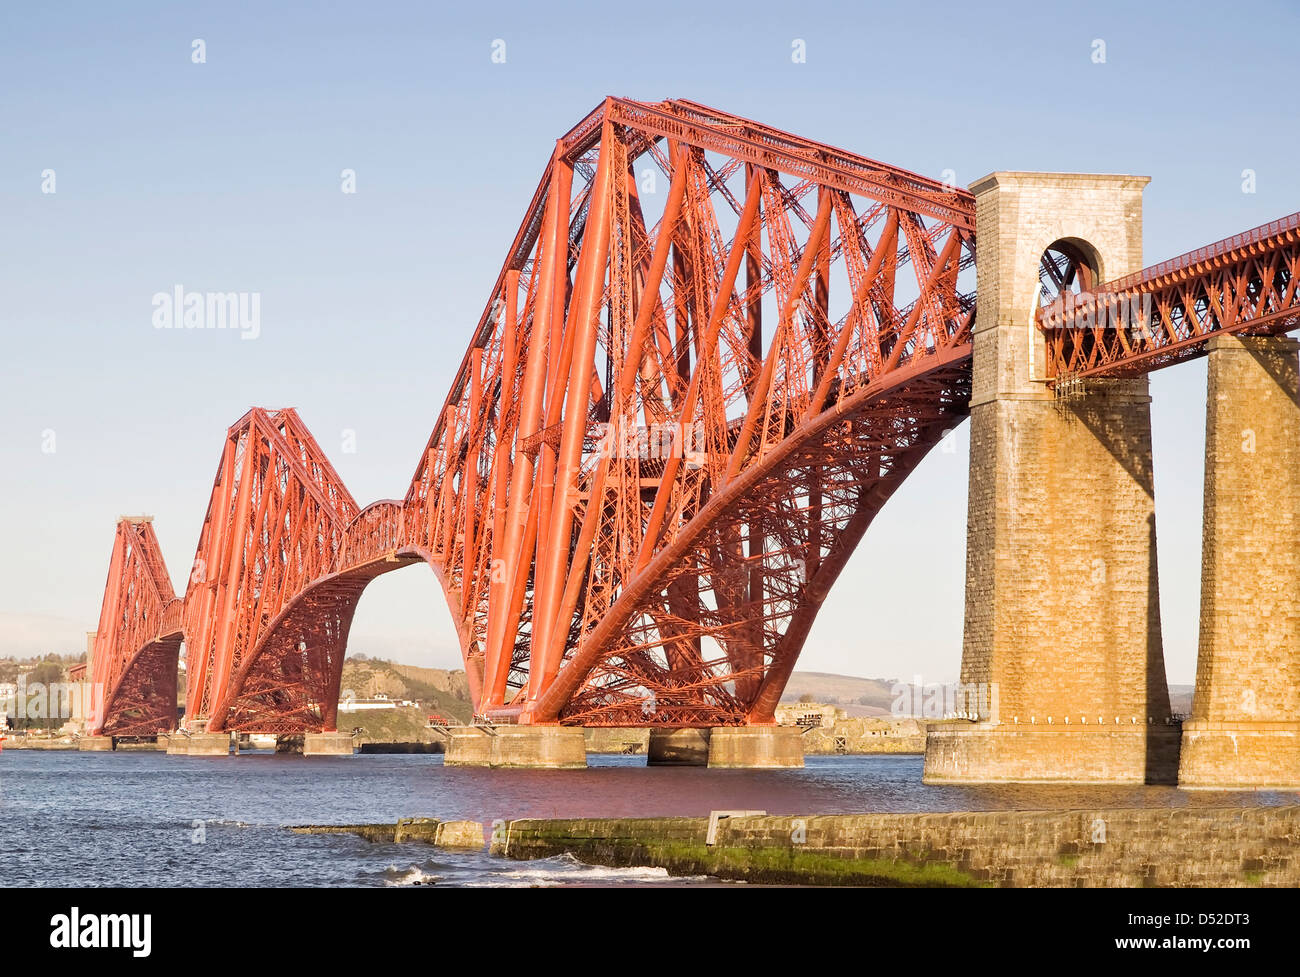 Forth Rail Bridge, Edinburgh, Scotland. This bridge connects the towns of North and South Queensferry. Stock Photo